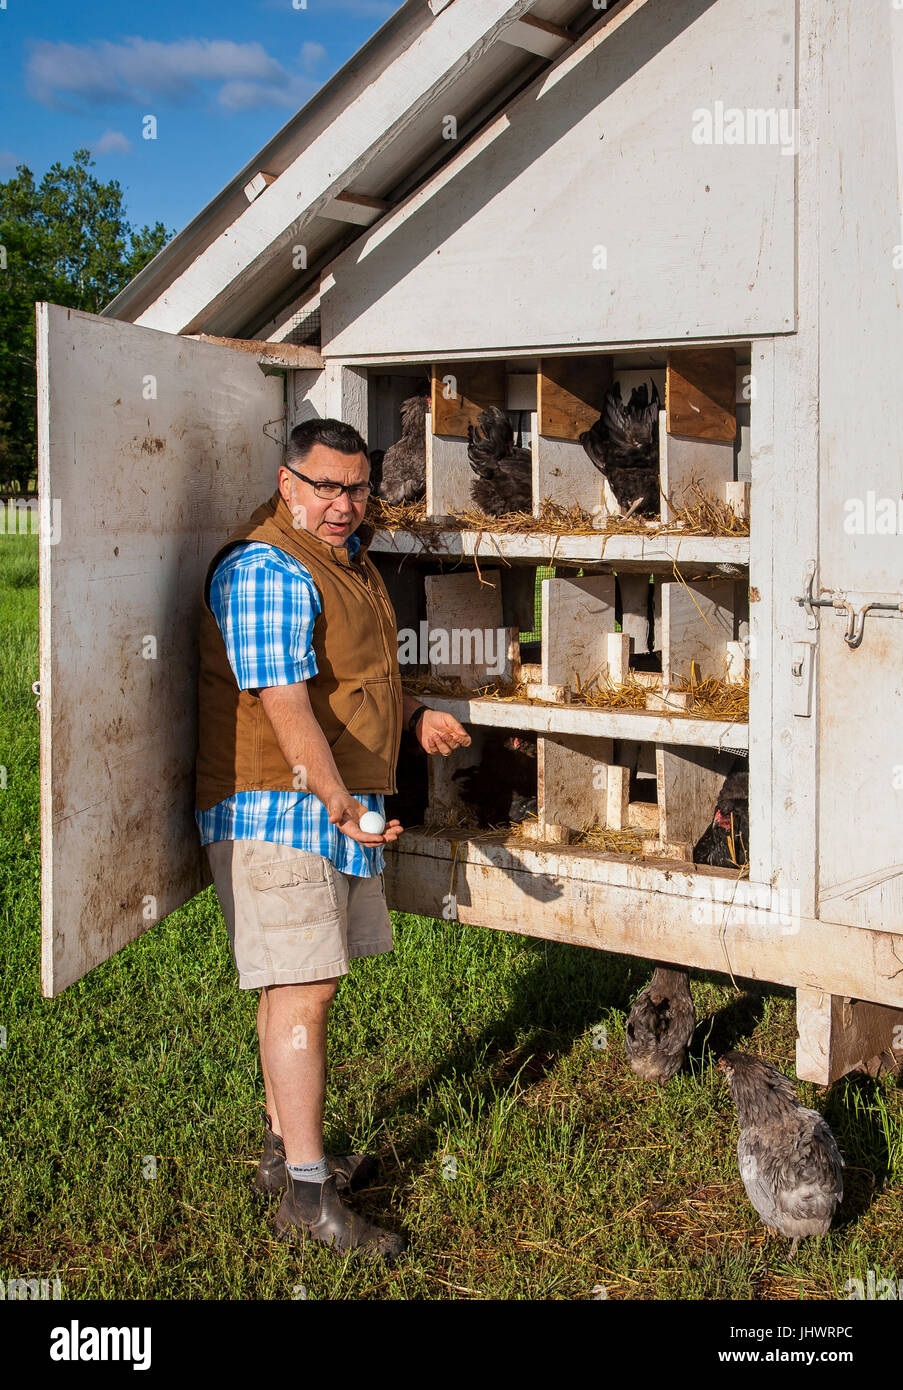 Farmer wearing casual clothes, 40's-50's male shows egg in hand, near open hen house Stock Photo